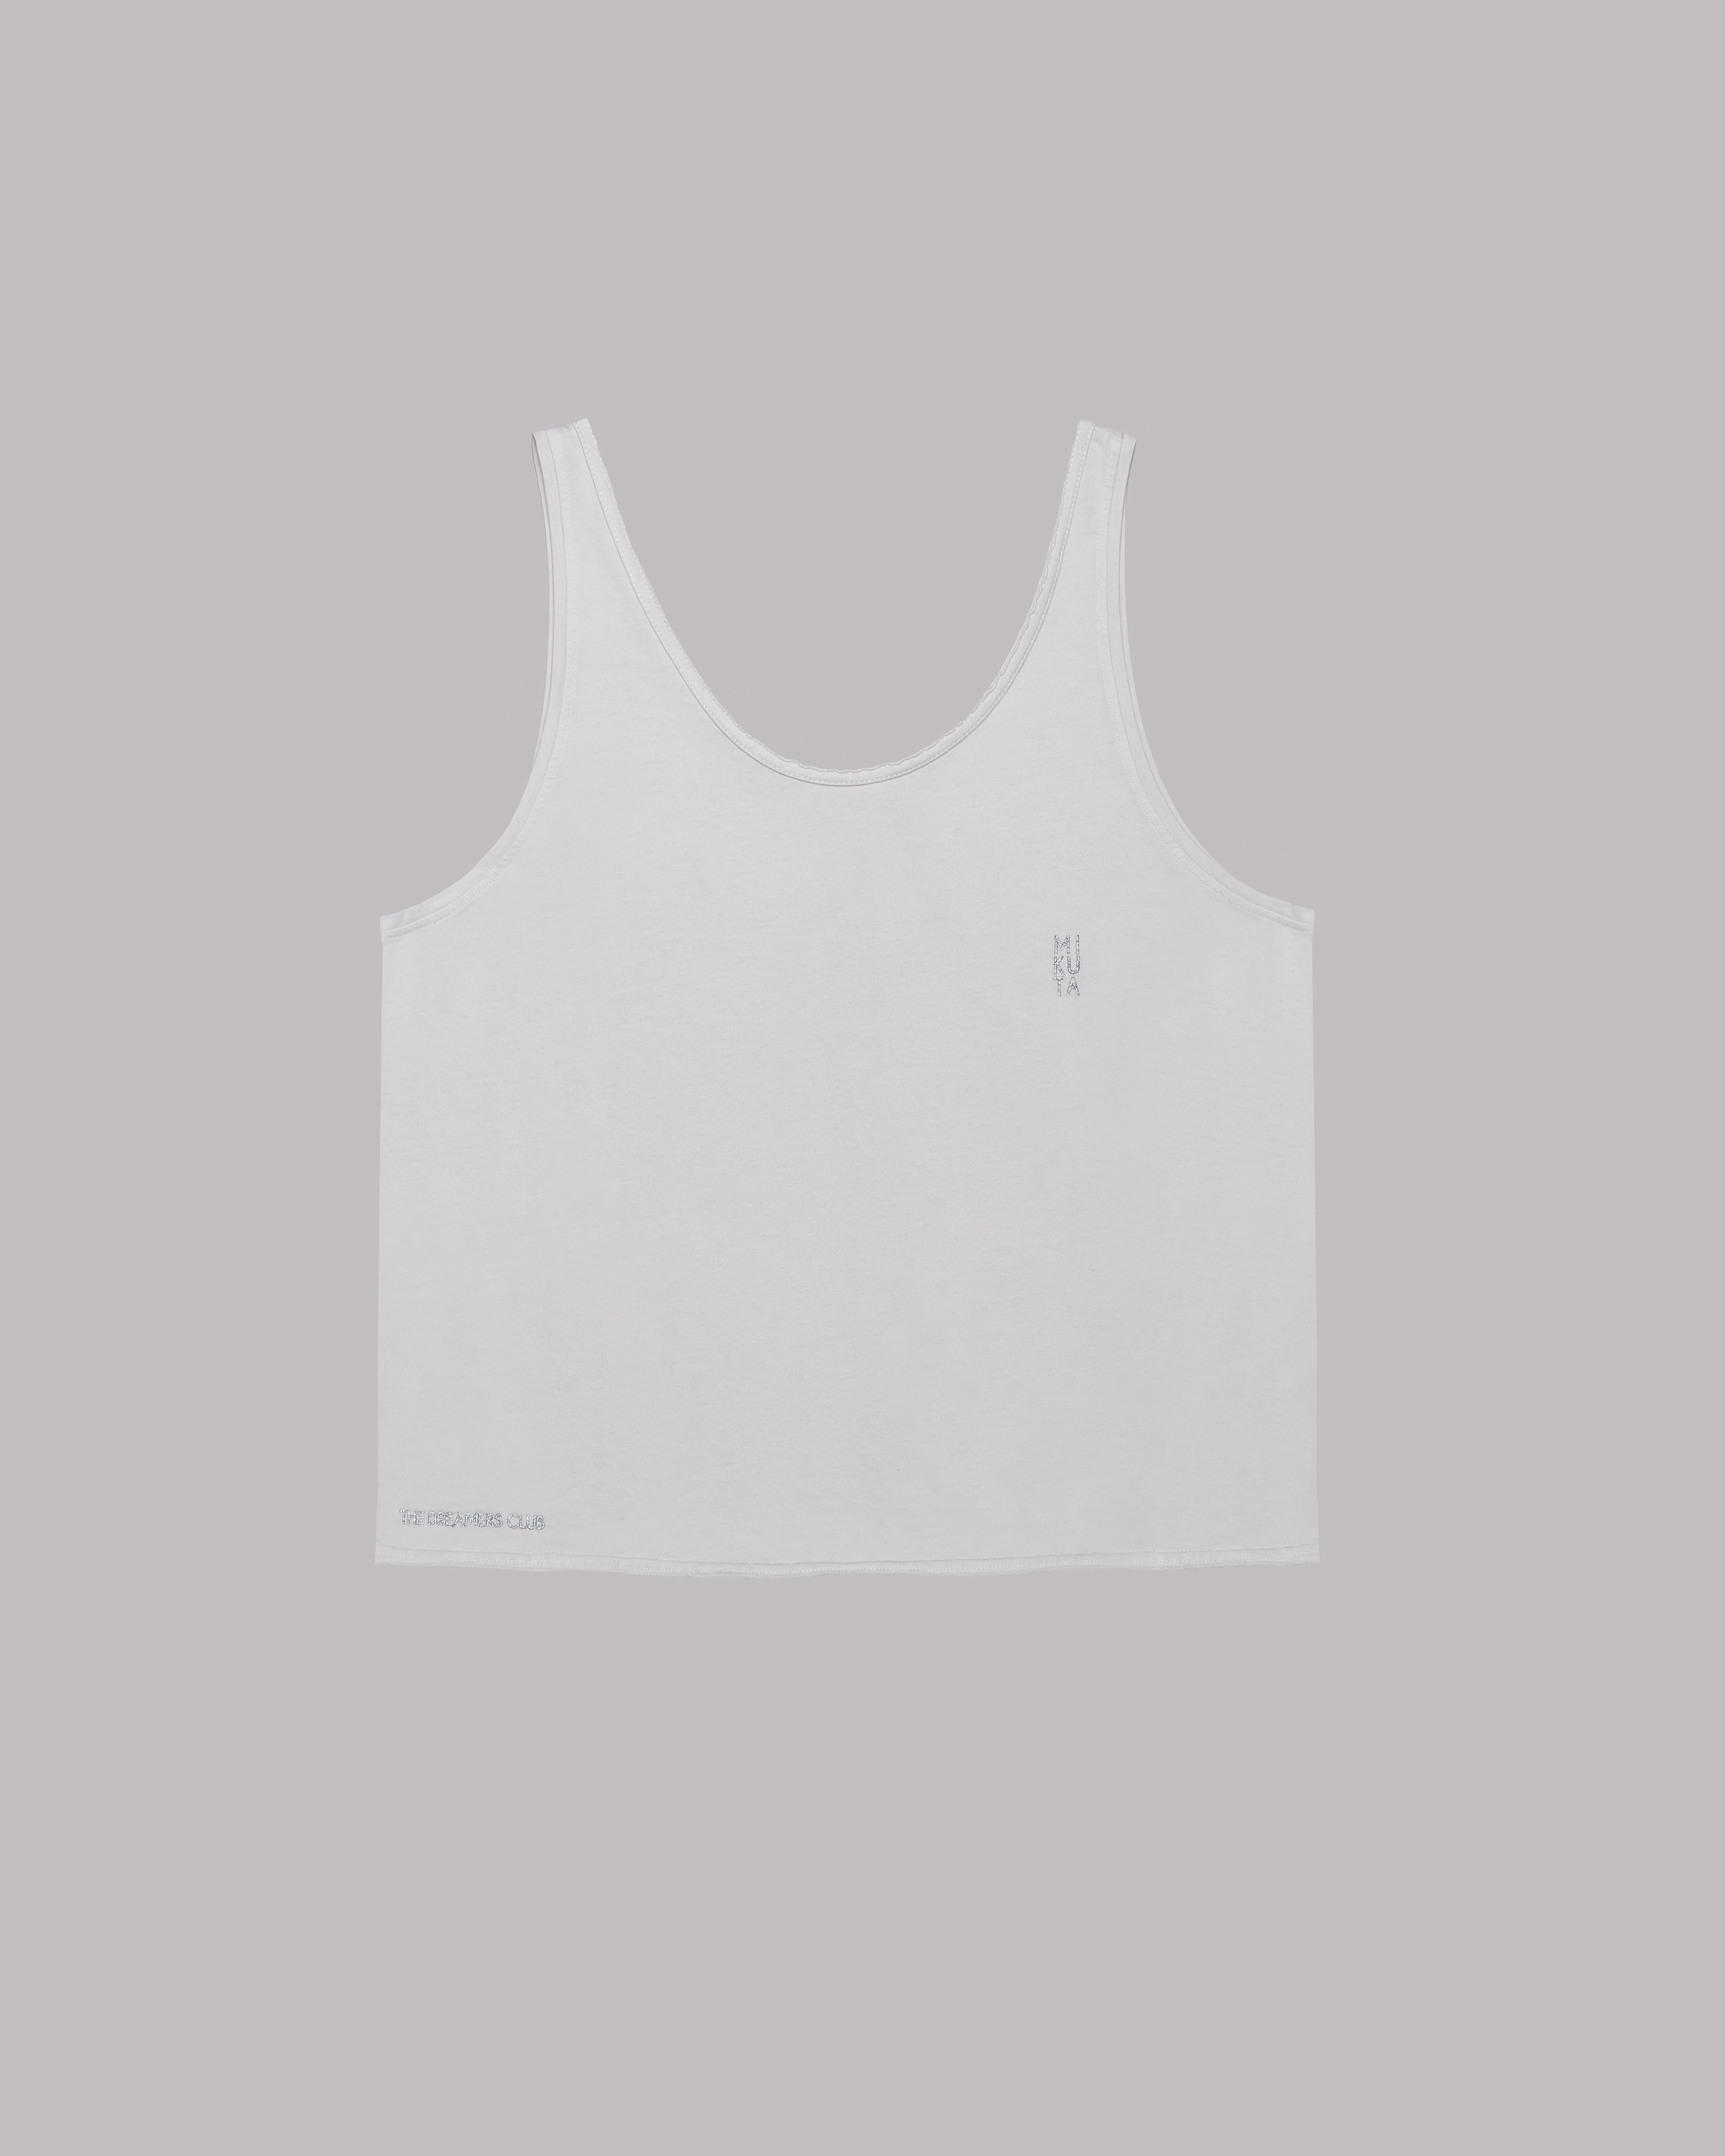 The Light Dreamers Tank Top